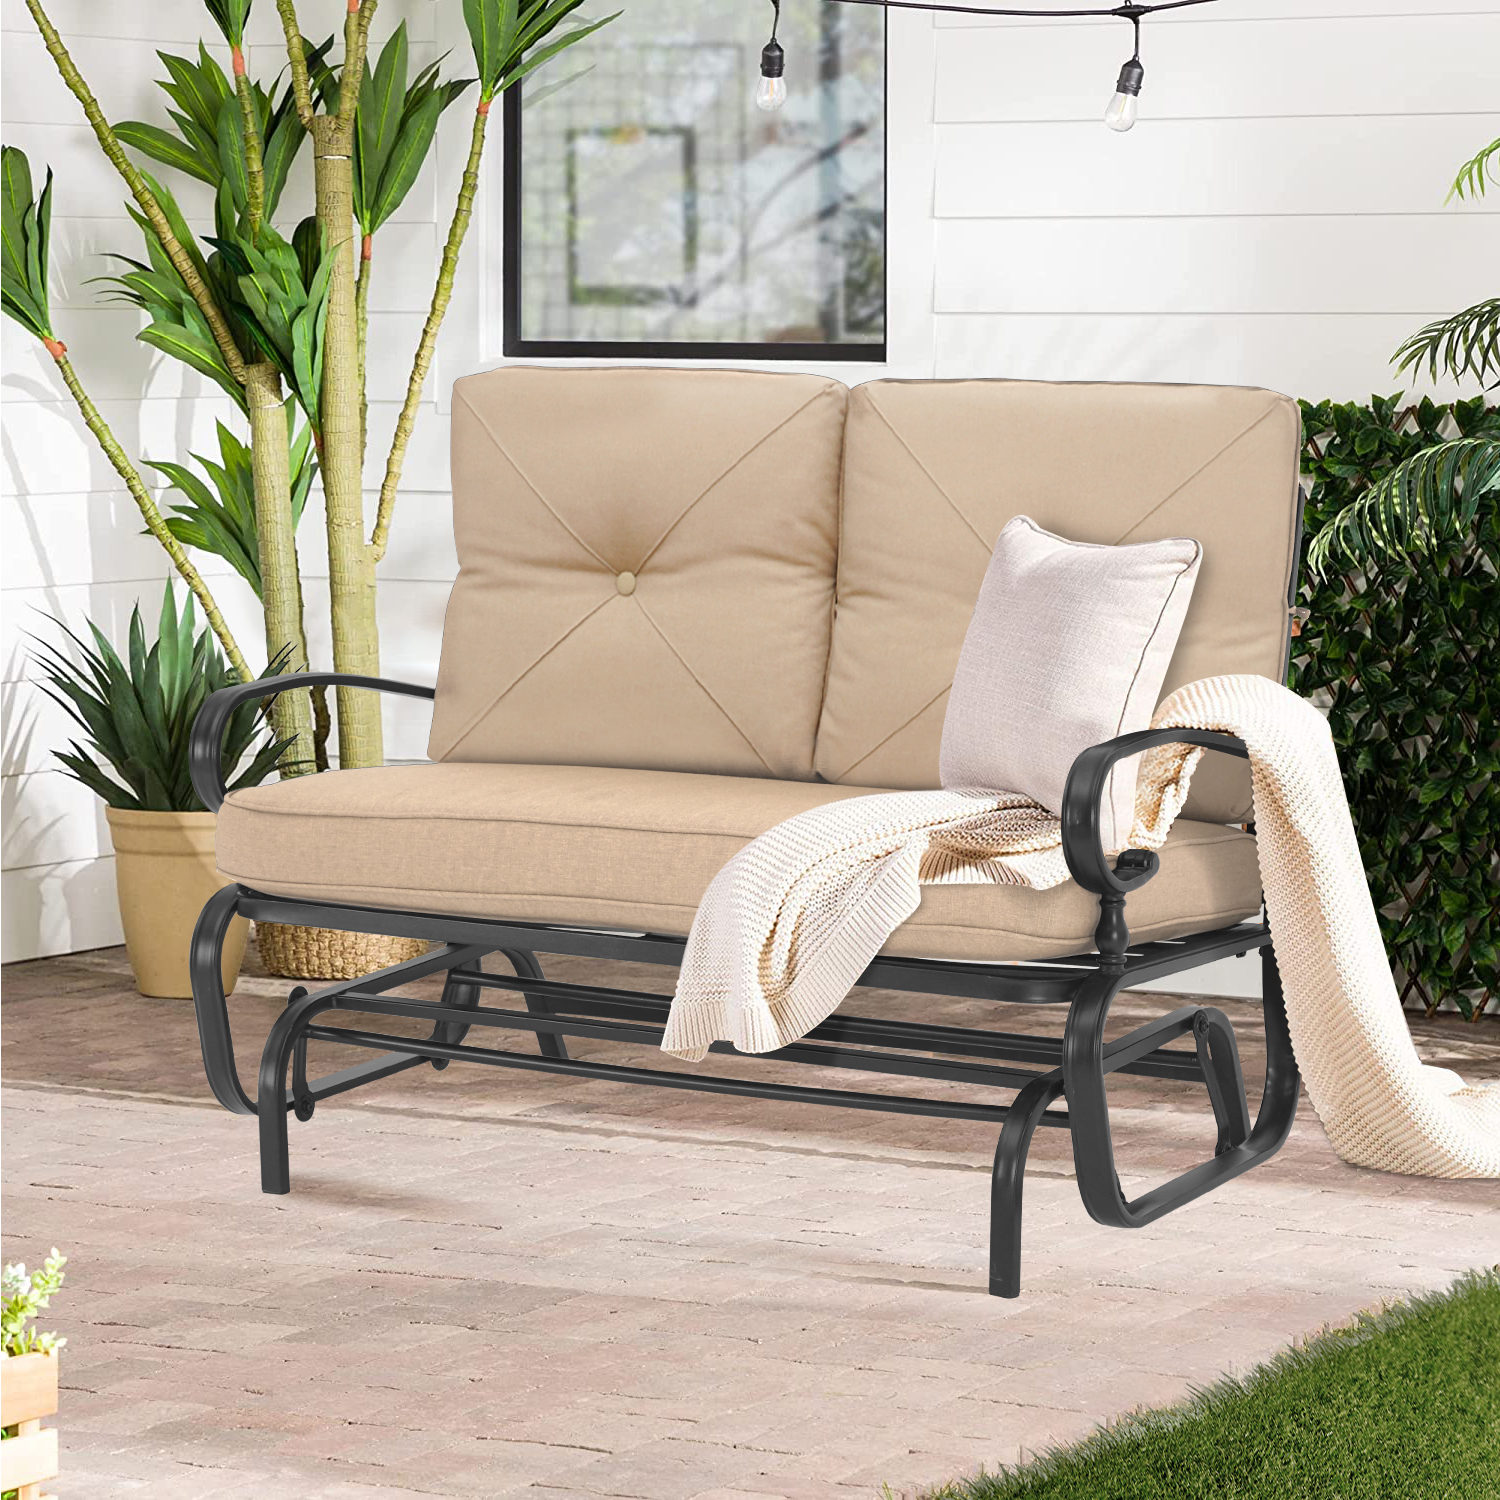 SUNCROWN Outdoor Patio Swing Glider Bench Rocking Loveseat for 2 Person, Brown - image 1 of 7